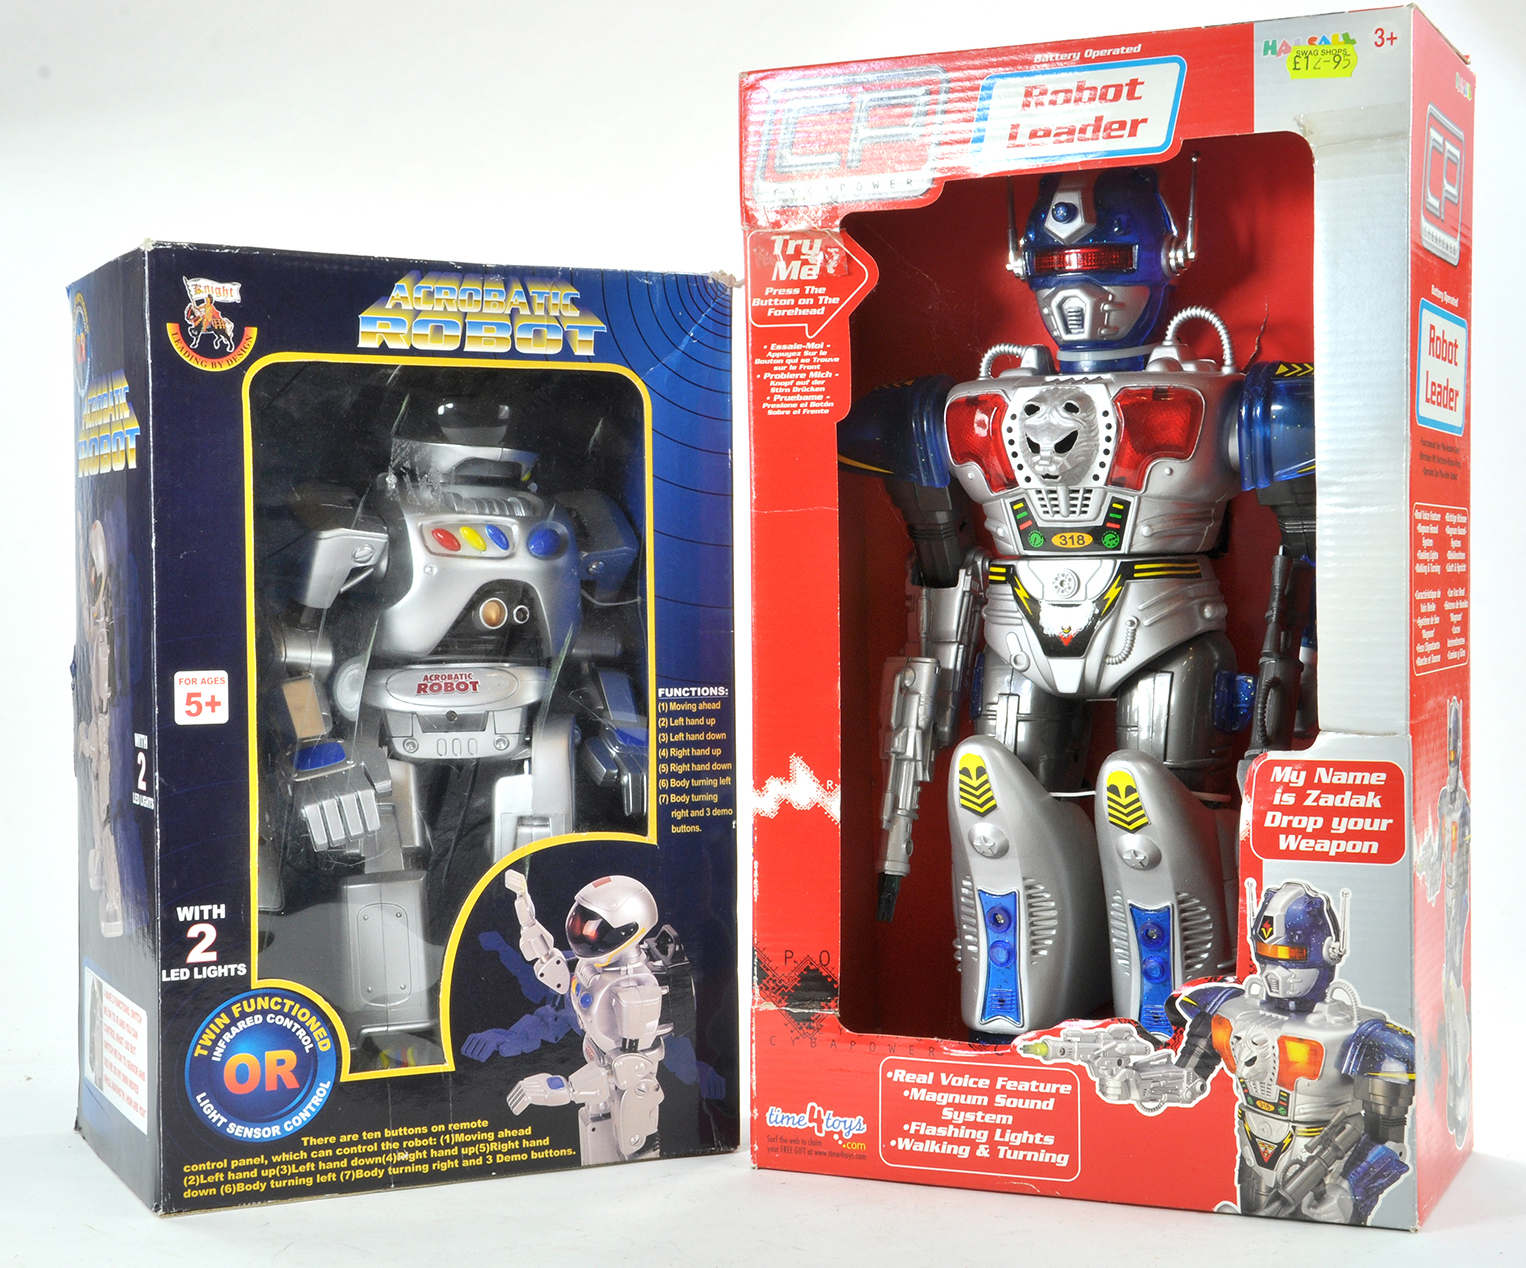 Duo of Battery Operated large Robots - Appear as new in boxes, however untested.